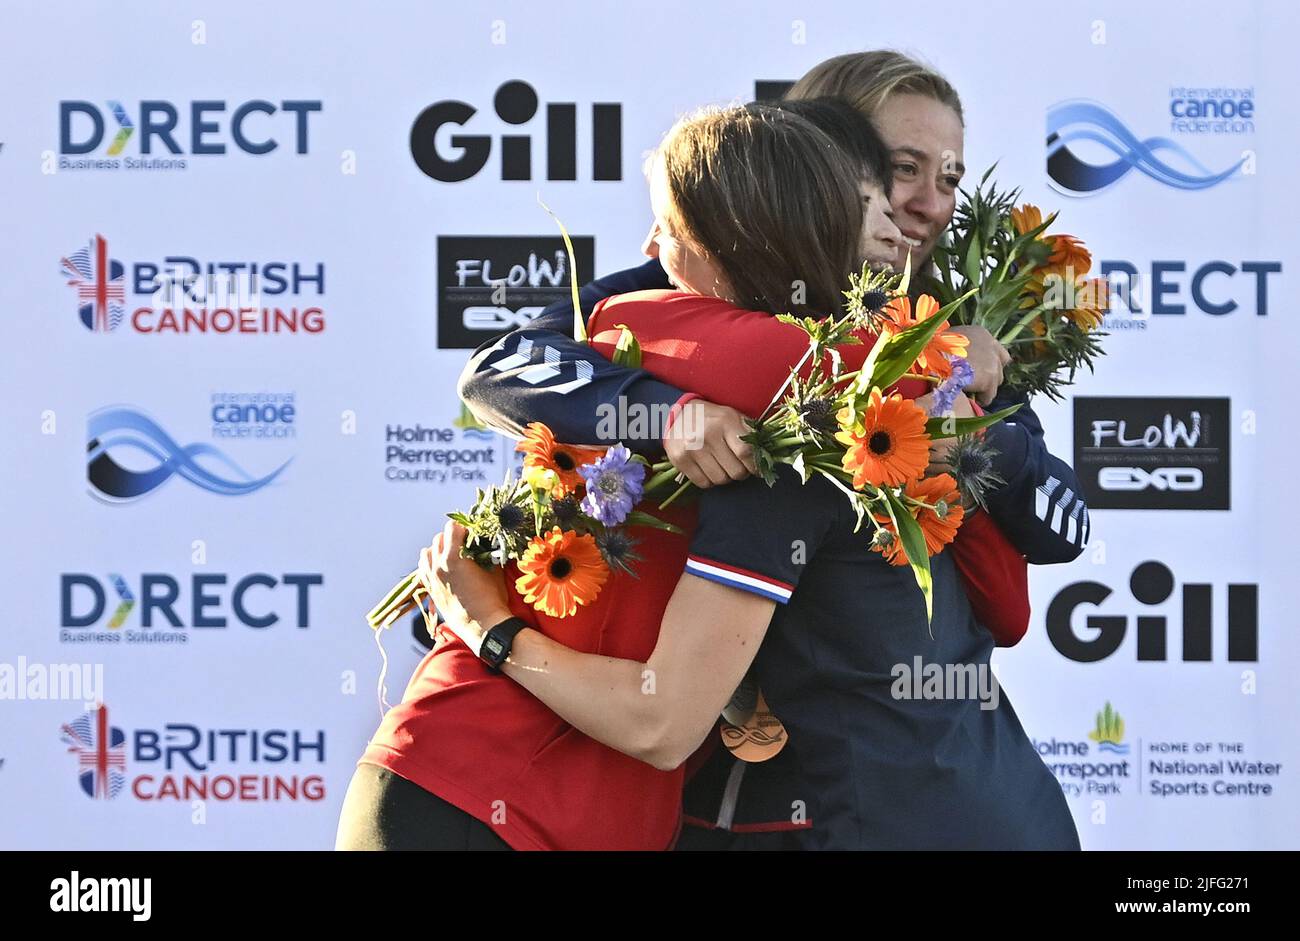 Nottingham, United Kingdom. 02nd July, 2022. The ICF 2022 canoe freestyle World Championships. National Water Sports Centre, Holme Pierrepont Country Park.All 3 medalists hug. (l to r) Hitomi Takaku (JPN, Silver), Ottilie Robinson-Shaw (GBR, Gold) and Marlene Devillez (FRA, Bronze) hug with their medals and flowers to celebrate during the medal presentation for the Women's Kayak Final. Credit: Sport In Pictures/Alamy Live News Stock Photo